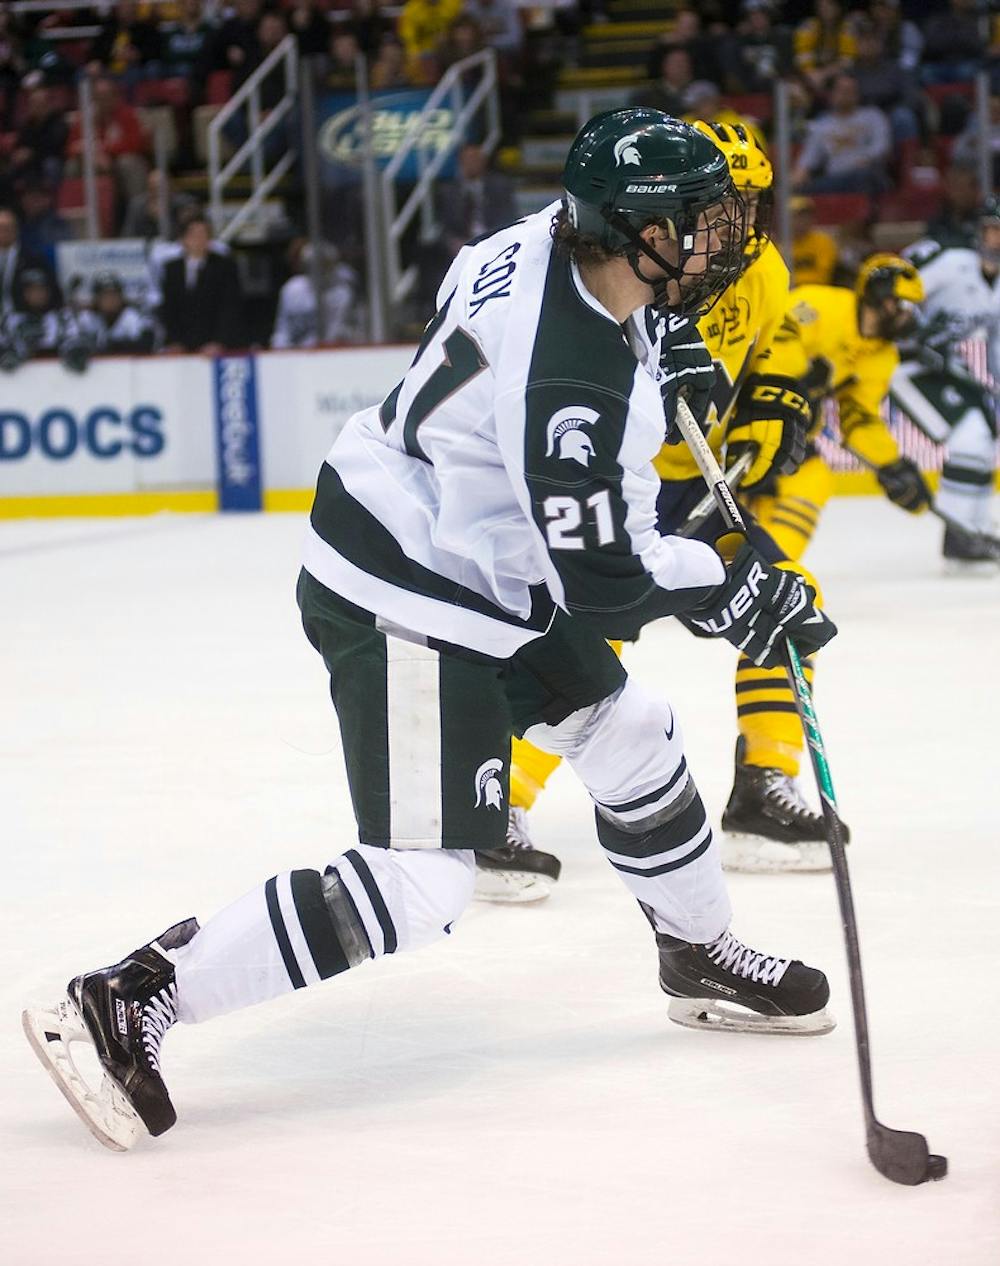 <p>Sophomore forward Joe Cox takes a shot at the Michigan net Dec. 29, 2014, during the 50th Great Lakes Invitational at Joe Louis Arena in Detroit. The Spartans were defeated by the Wolverines, 2-1. Danyelle Morrow/The State News</p>